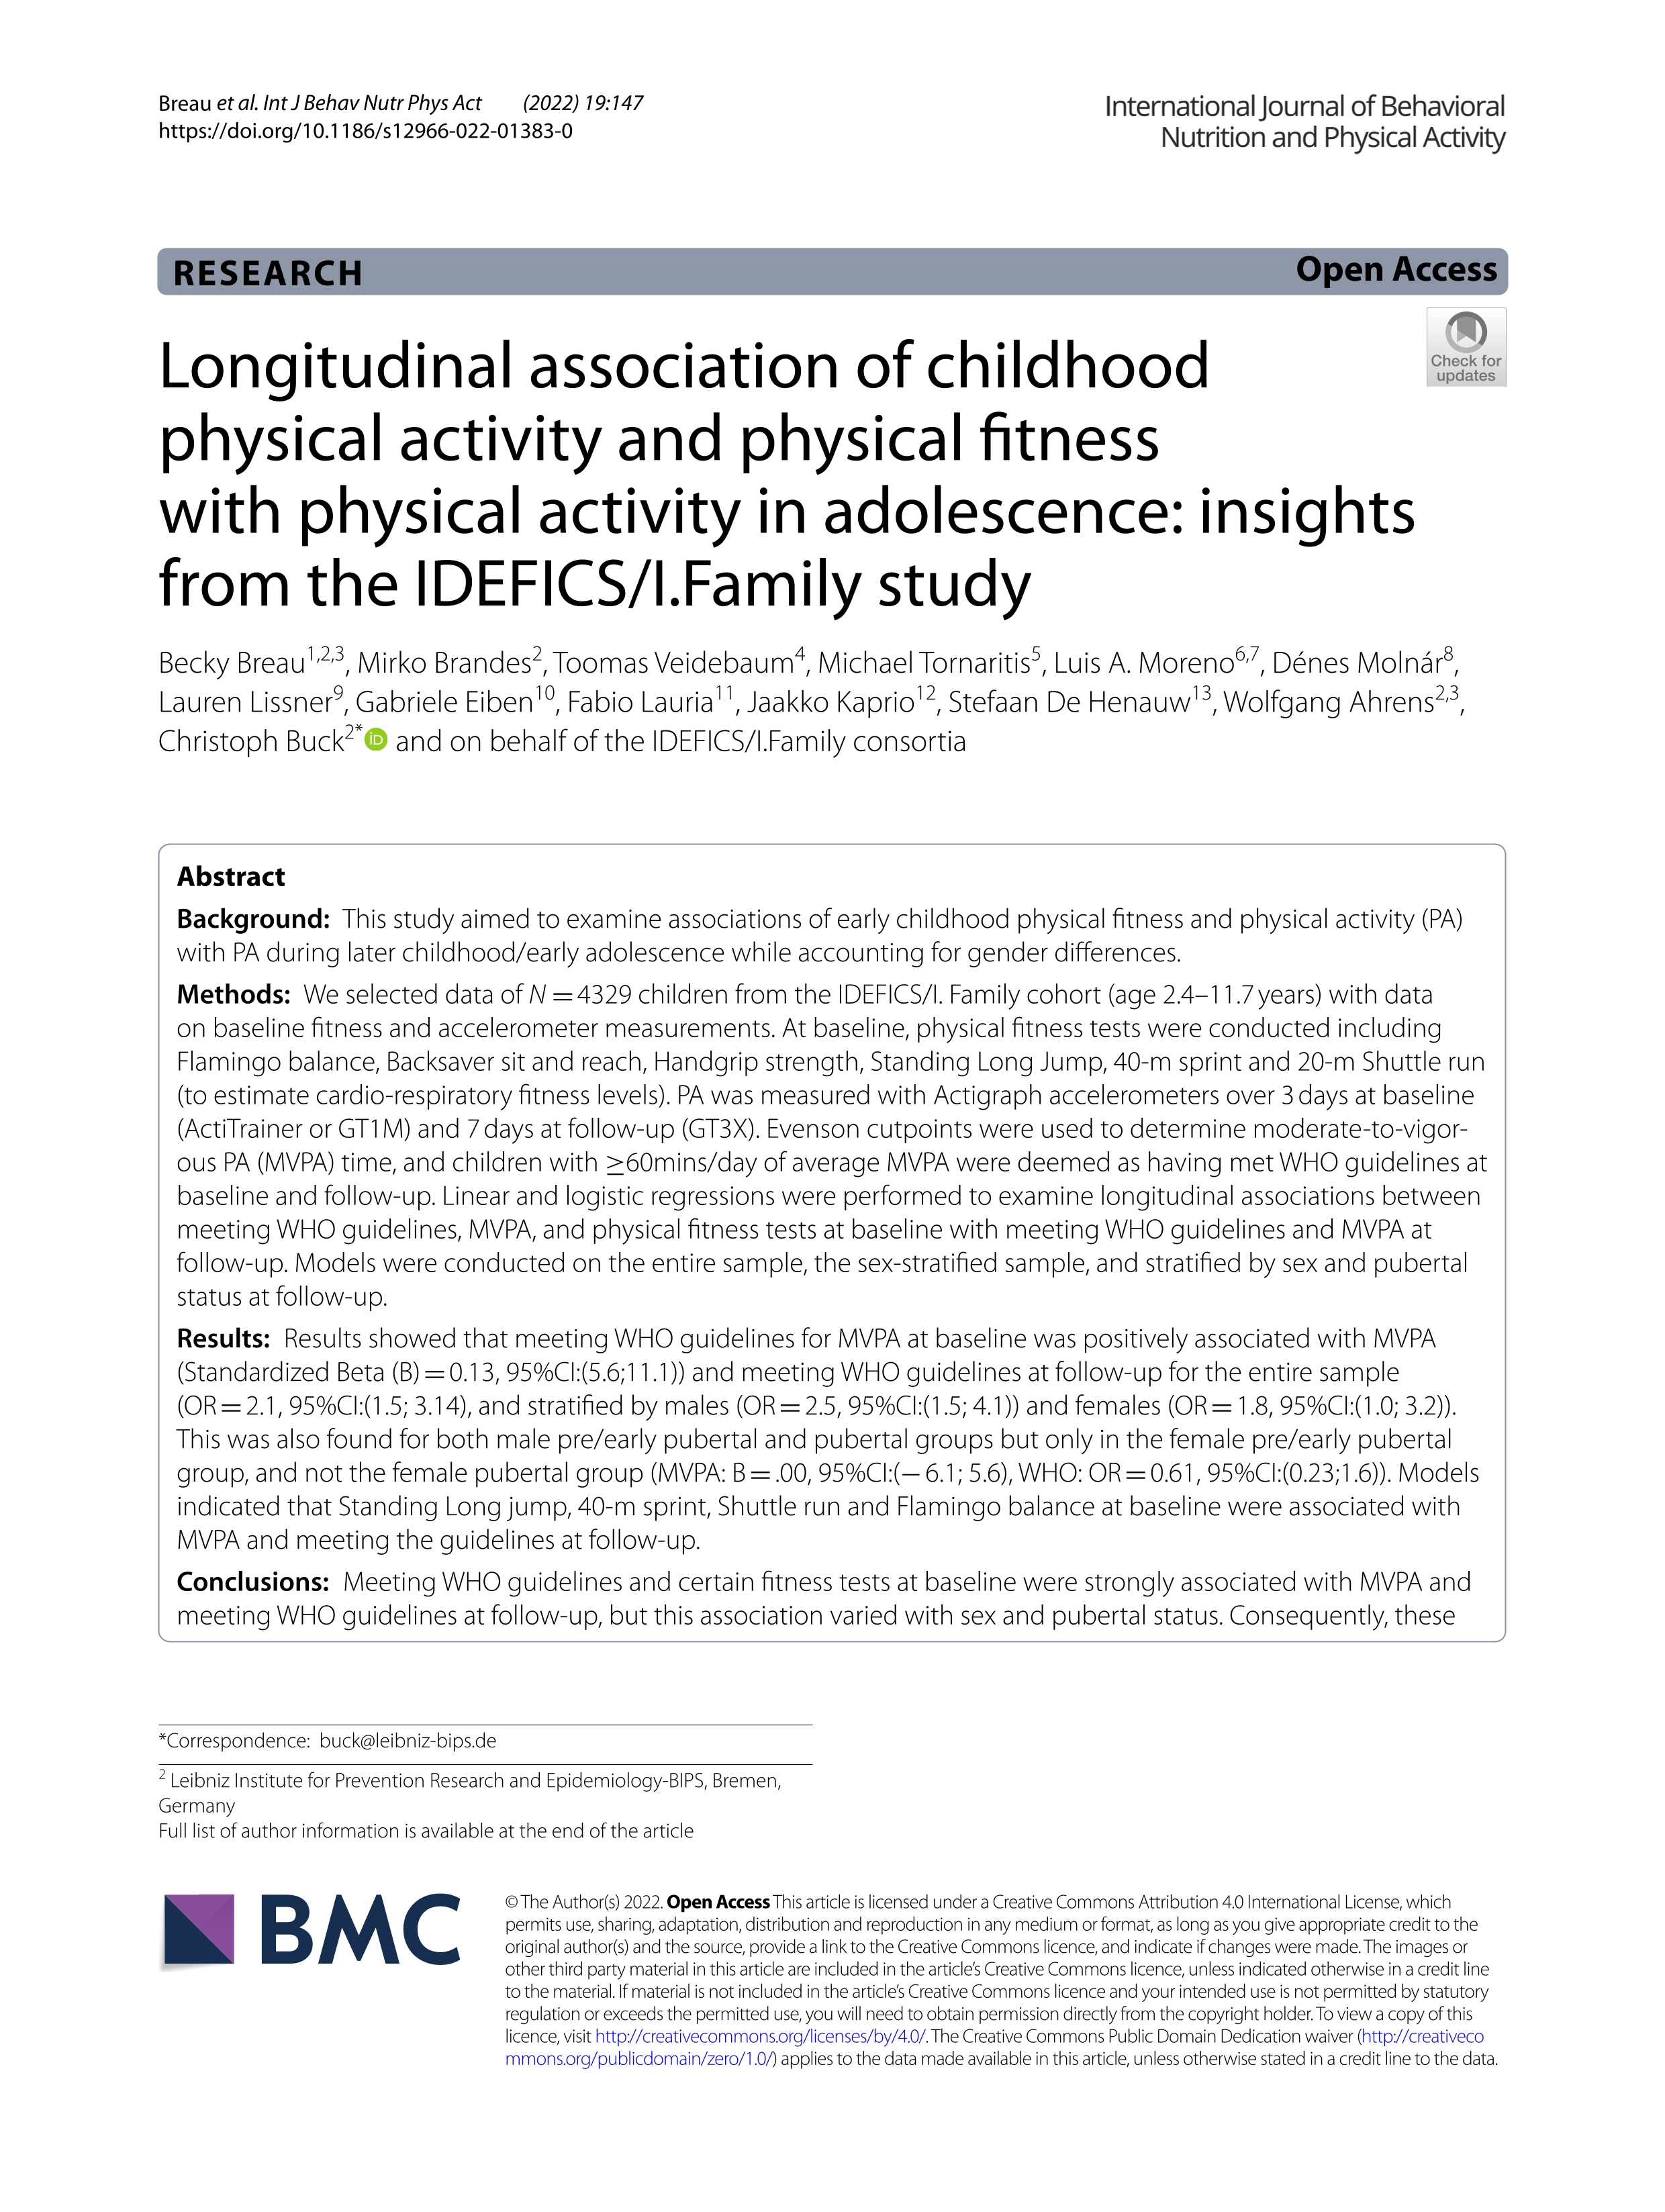 Longitudinal association of childhood physical activity and physical fitness with physical activity in adolescence: insights from the IDEFICS/I.Family study